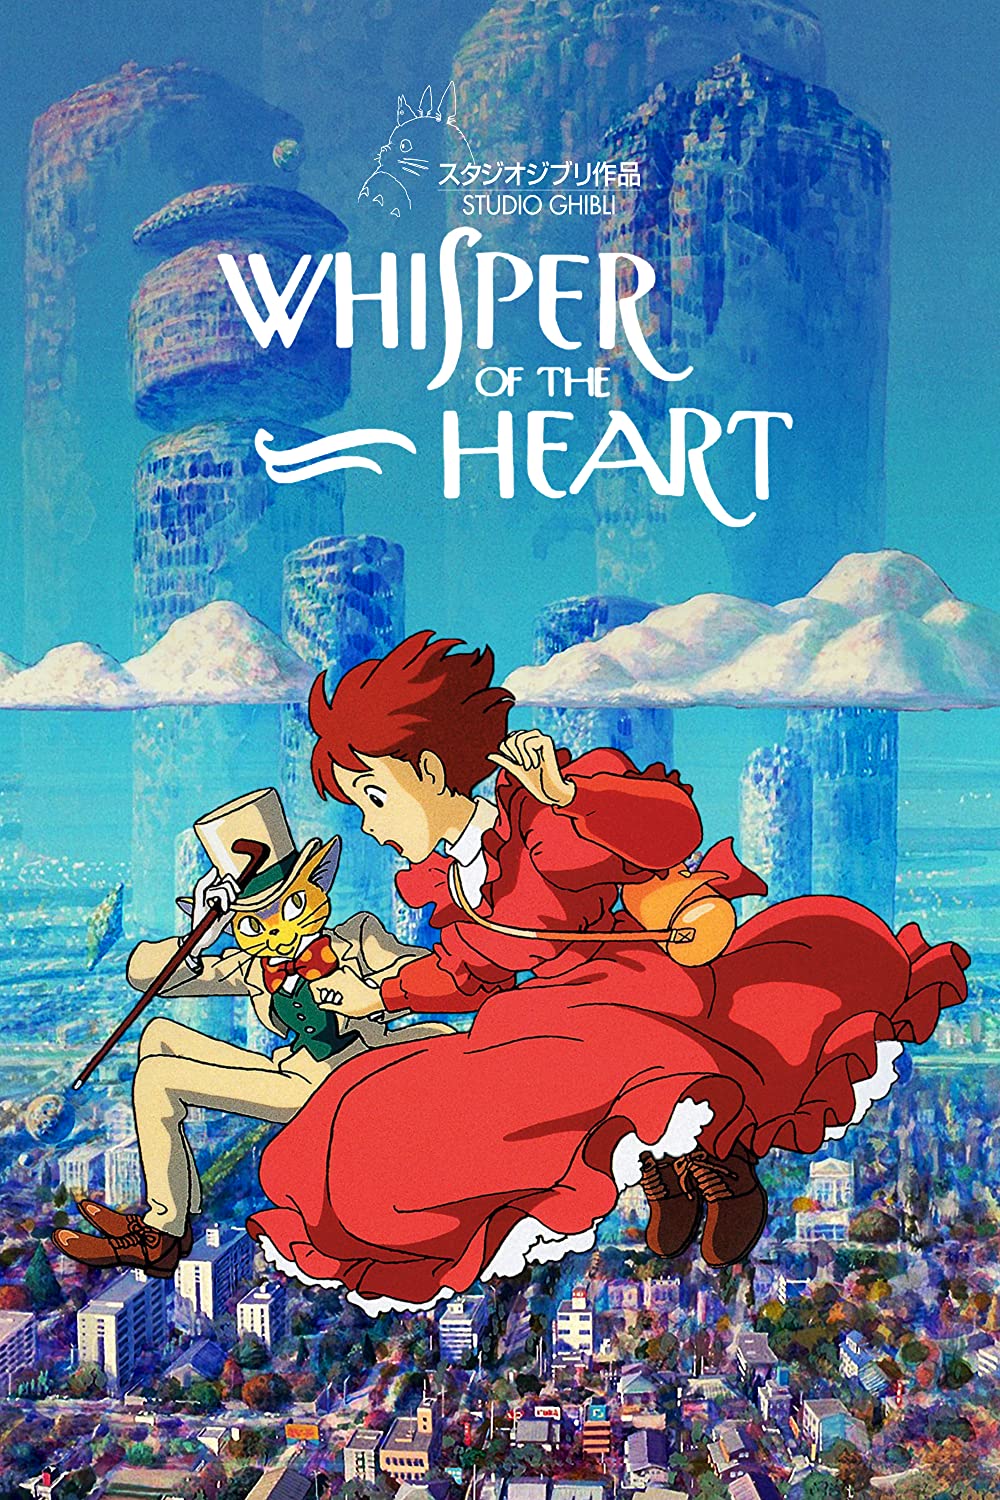 Whisper of the Heart (1995) is a anime movies on netflix